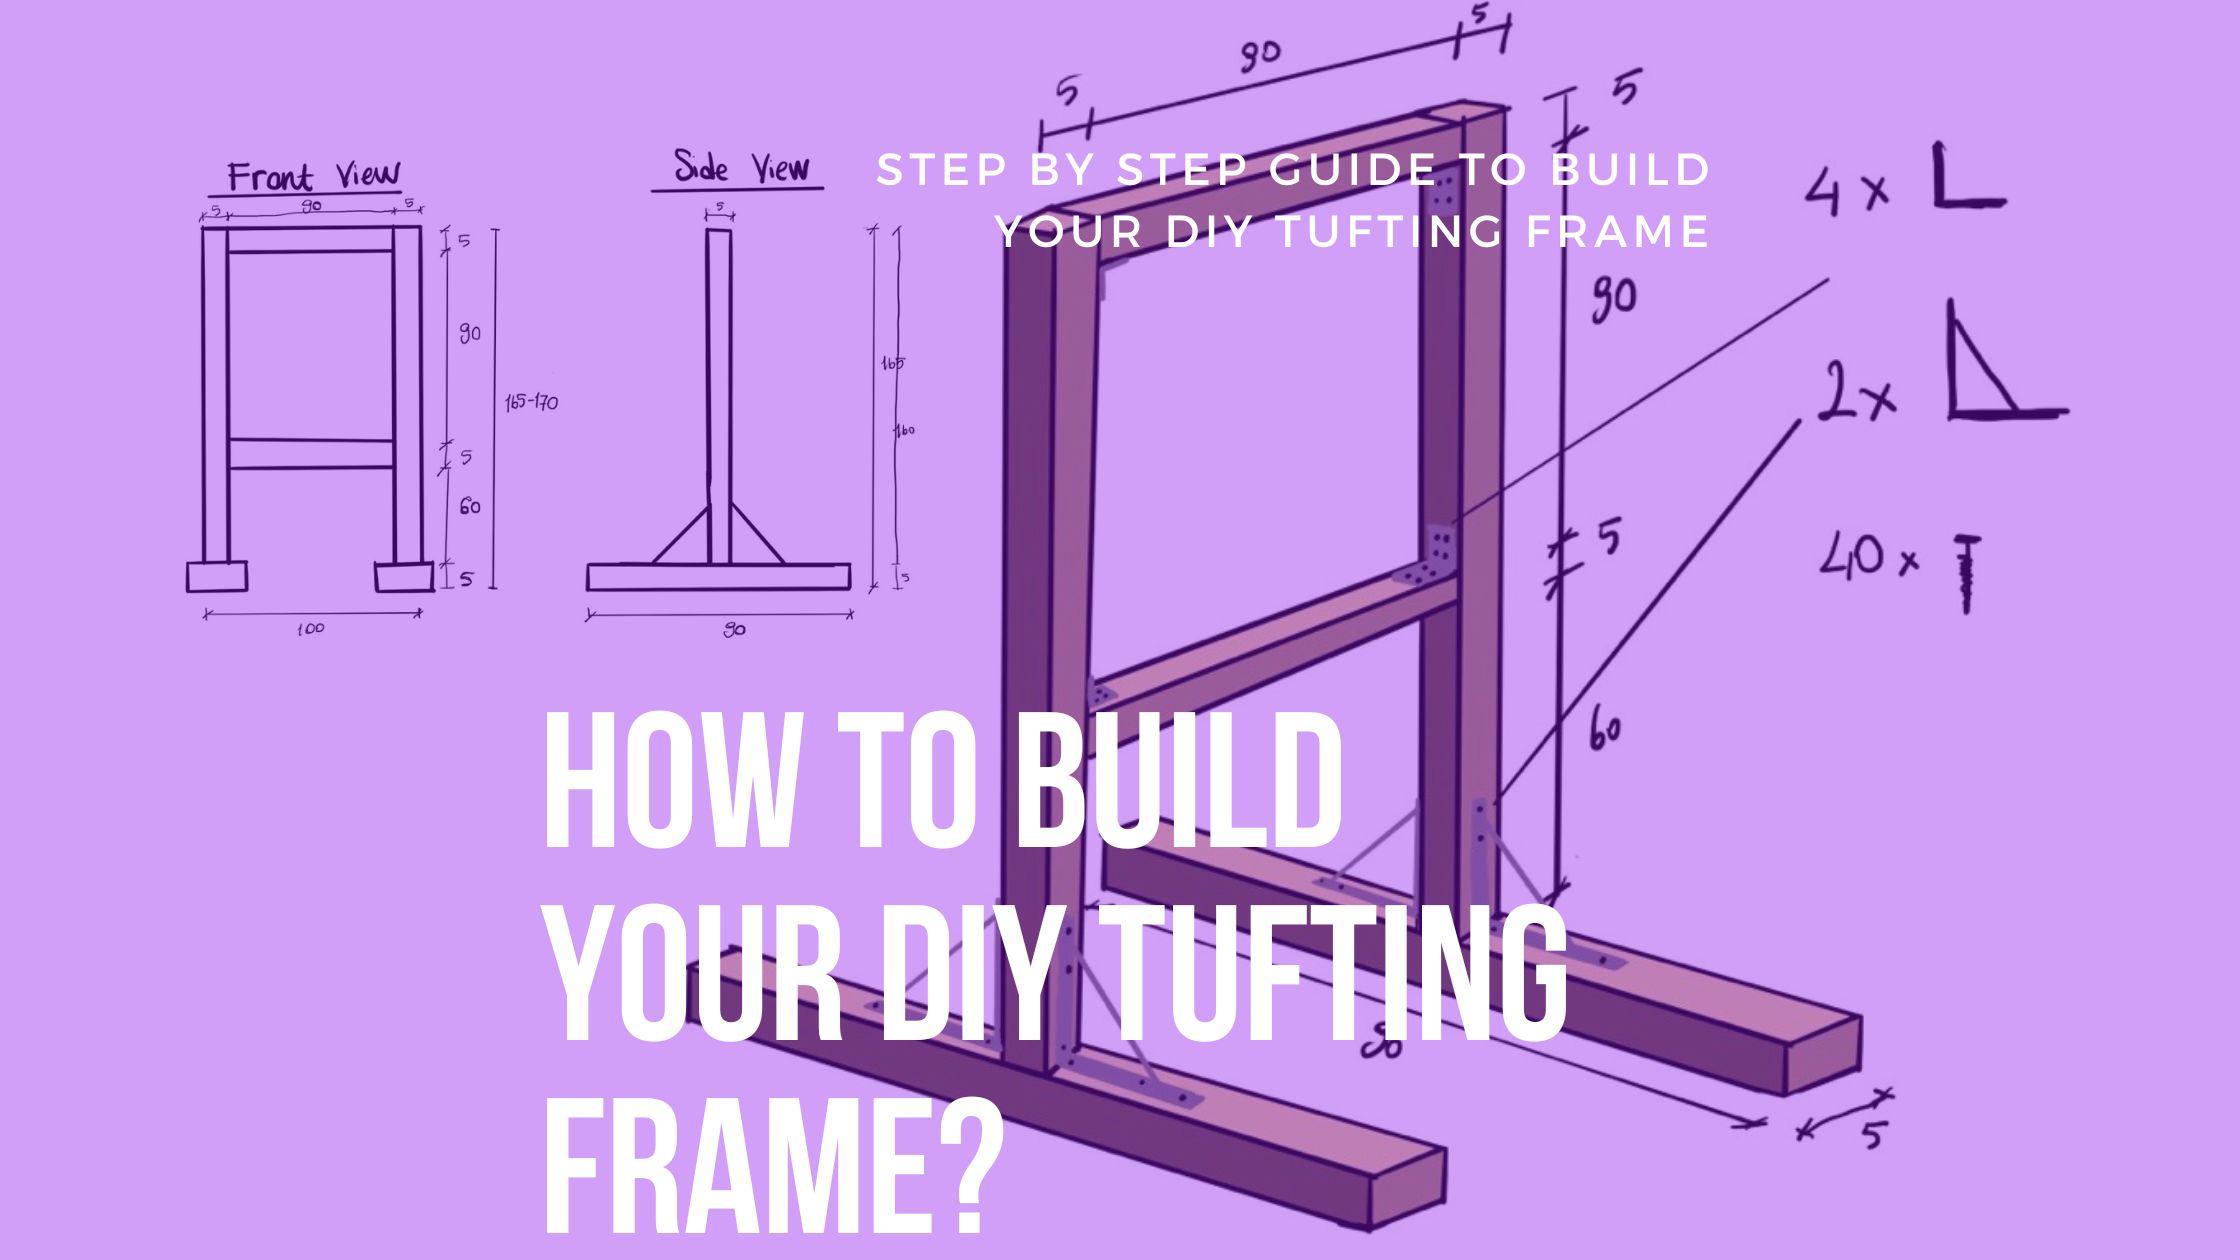 How Can I Build My Tufting Frame?